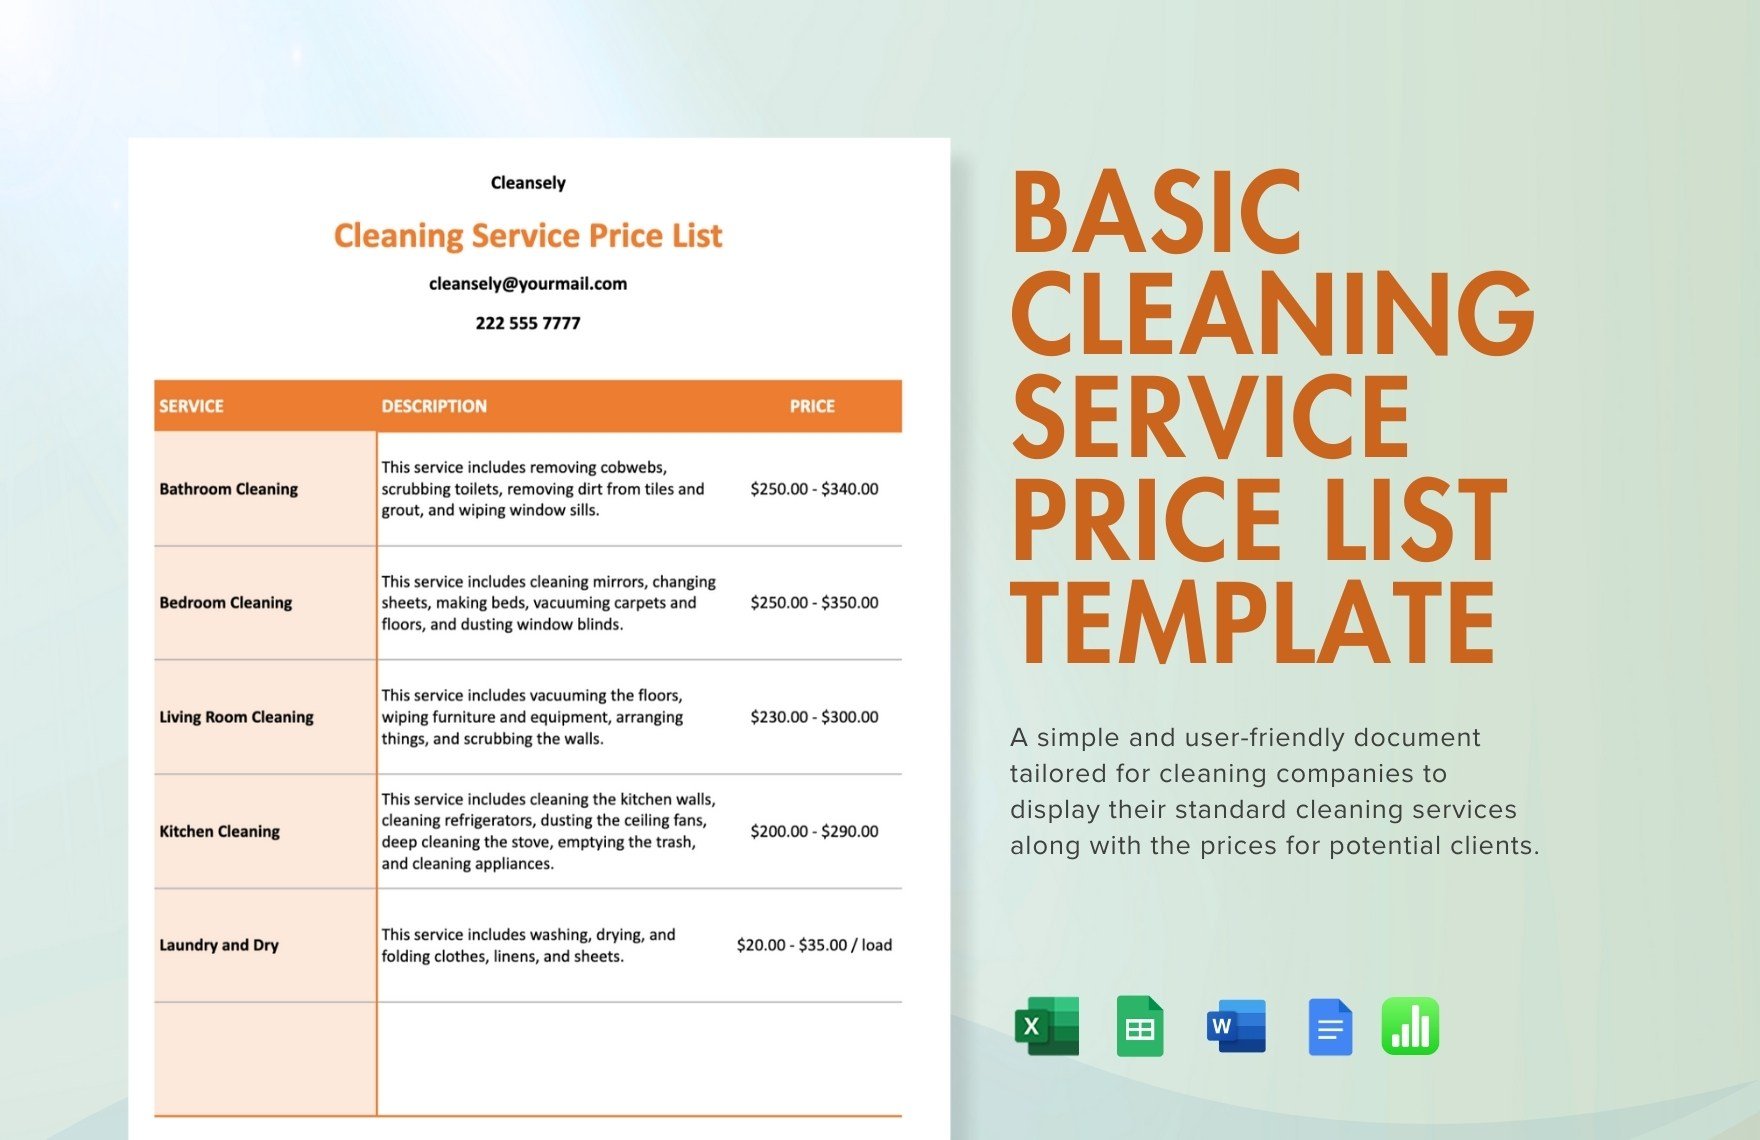 Basic Cleaning Service Price List Template